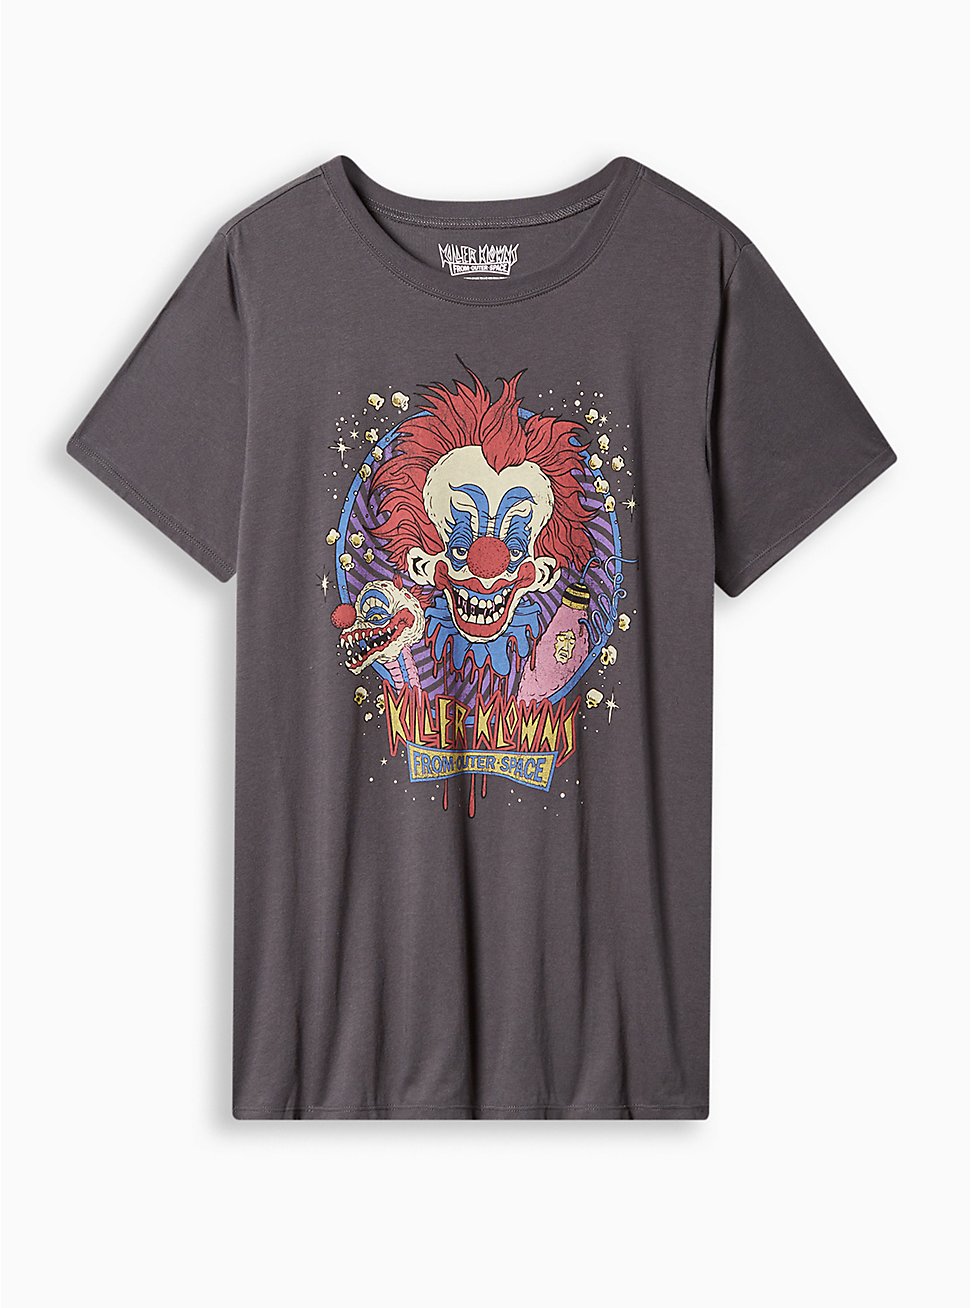 Plus Size Killer Klowns From Outer Space Classic Fit Cotton Crew Tee, VINTAGE BLACK, hi-res